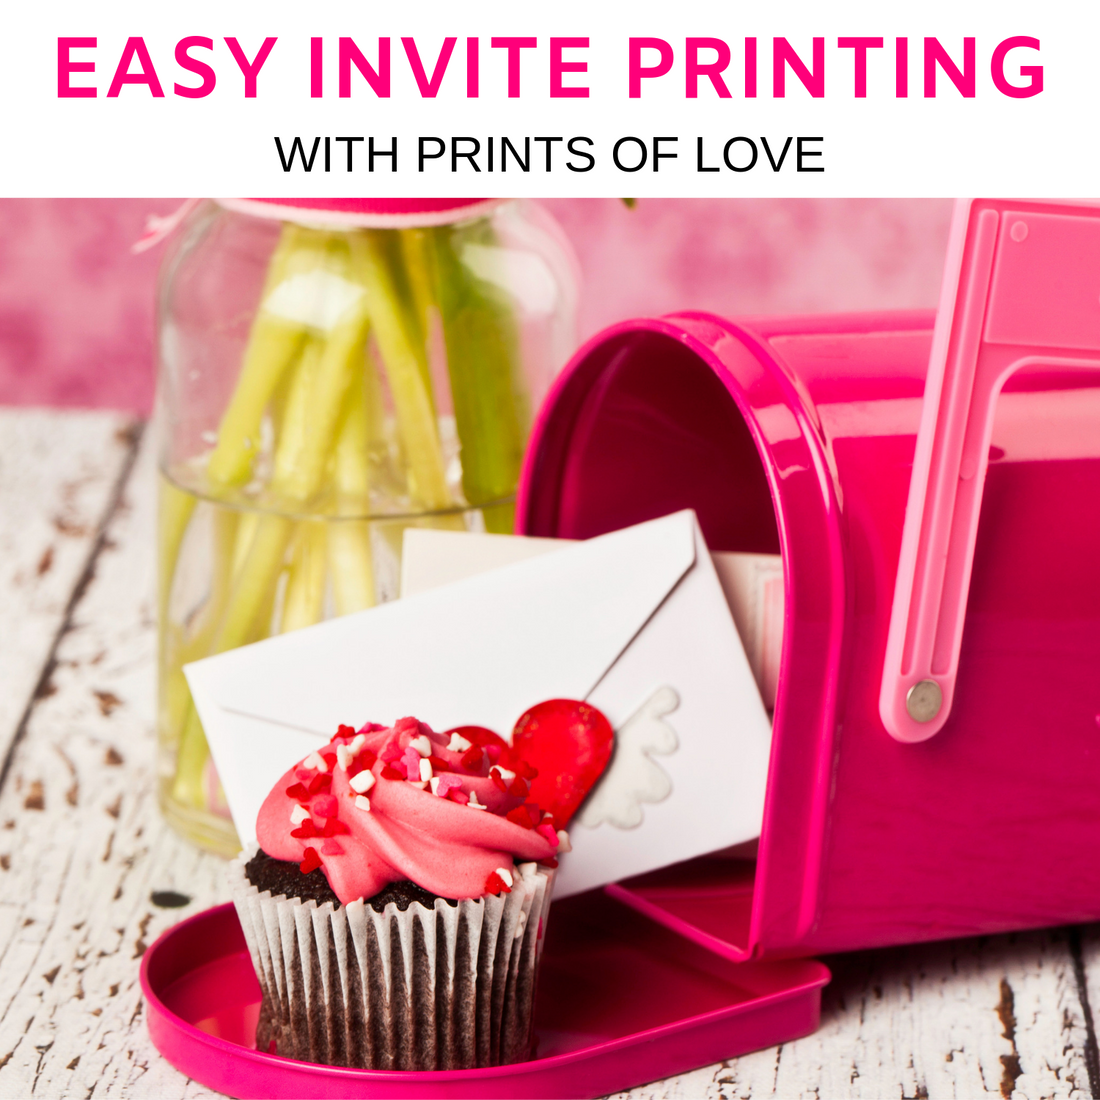 Easy Invitation Printing with Prints of Love